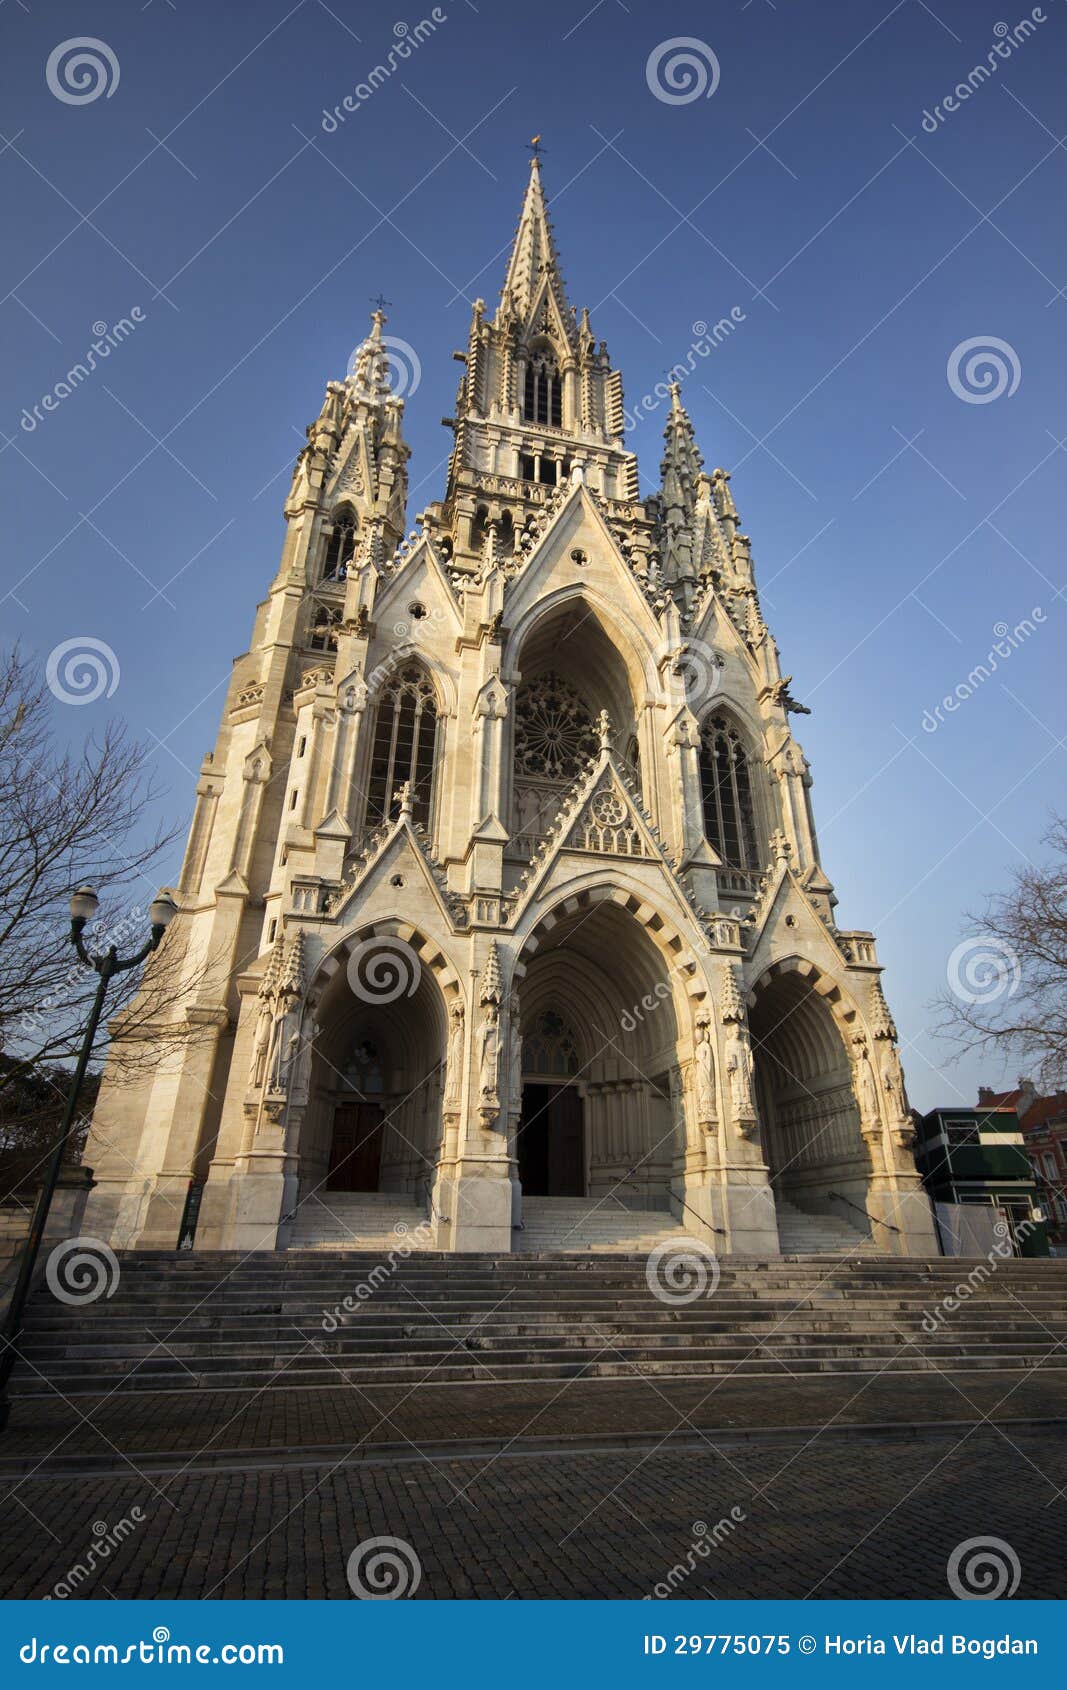 beautiful gothic cathedral from bruxelles (brusels) - belgium